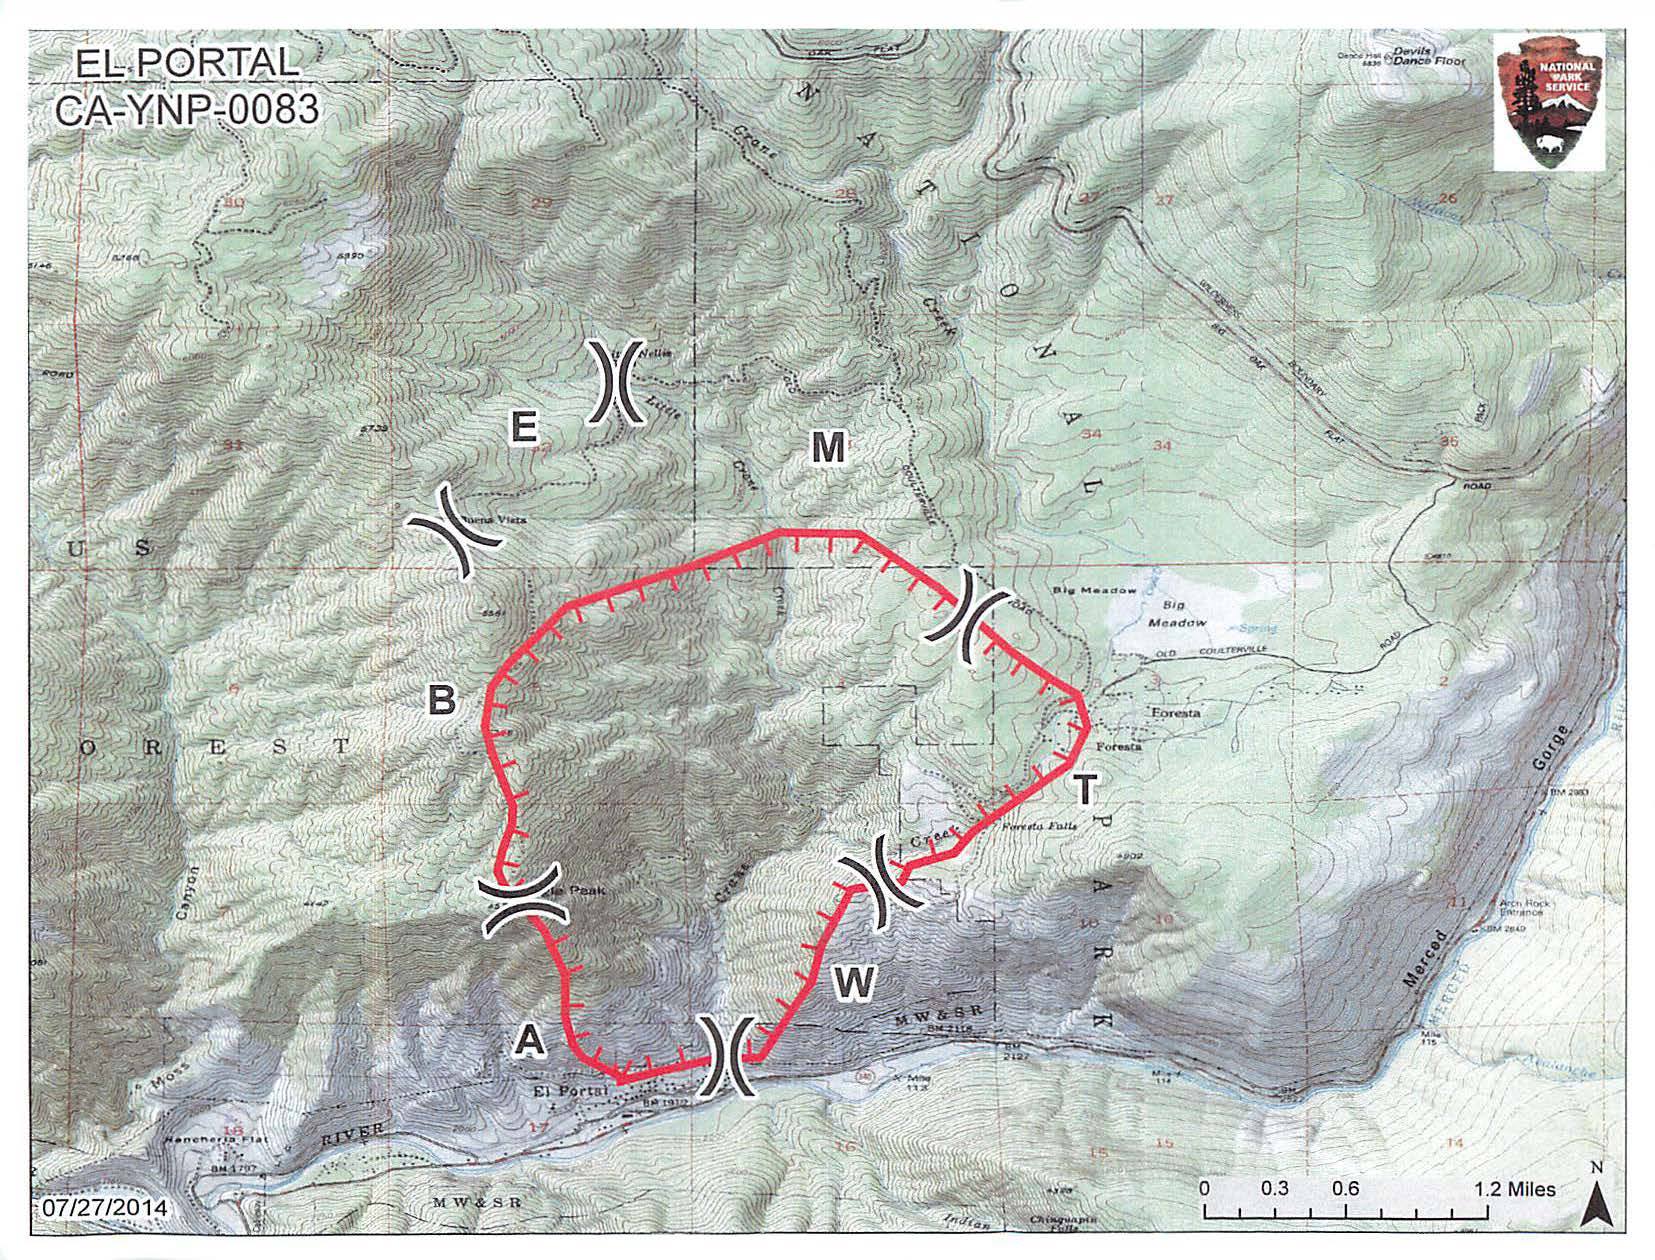 map showing fire perimeter in El Portal and Foresta areas